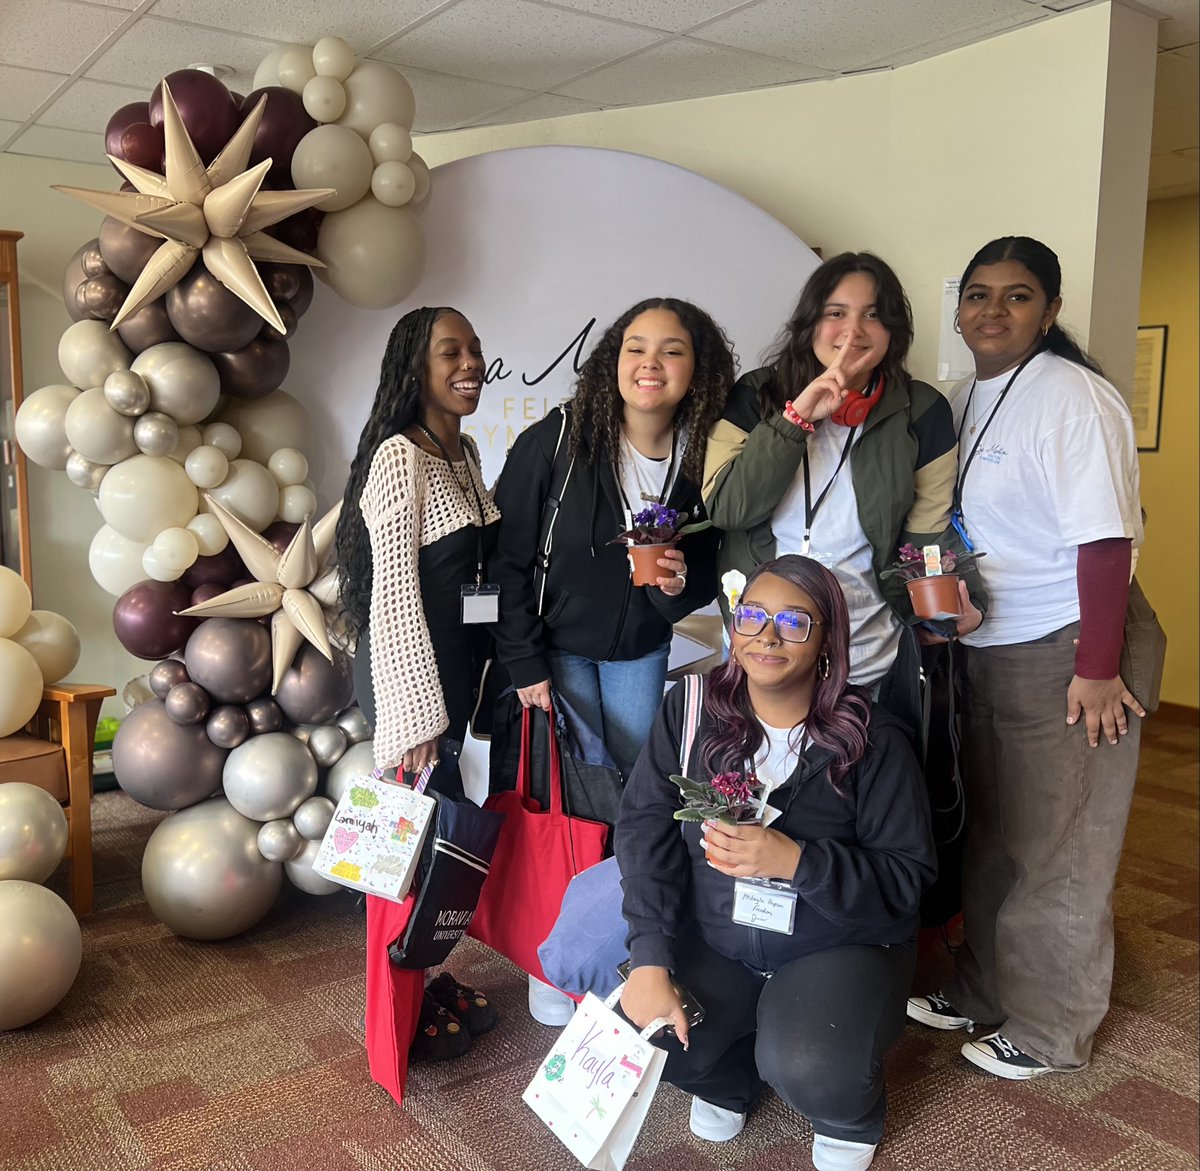 Five amazing Freedom students attended the Young Women of Color Symposium at Moravian University with faculty advisor Carmen Cespedes 💛🖤 @basdjacksilva @Leesonscience @BethlehemAreaSD